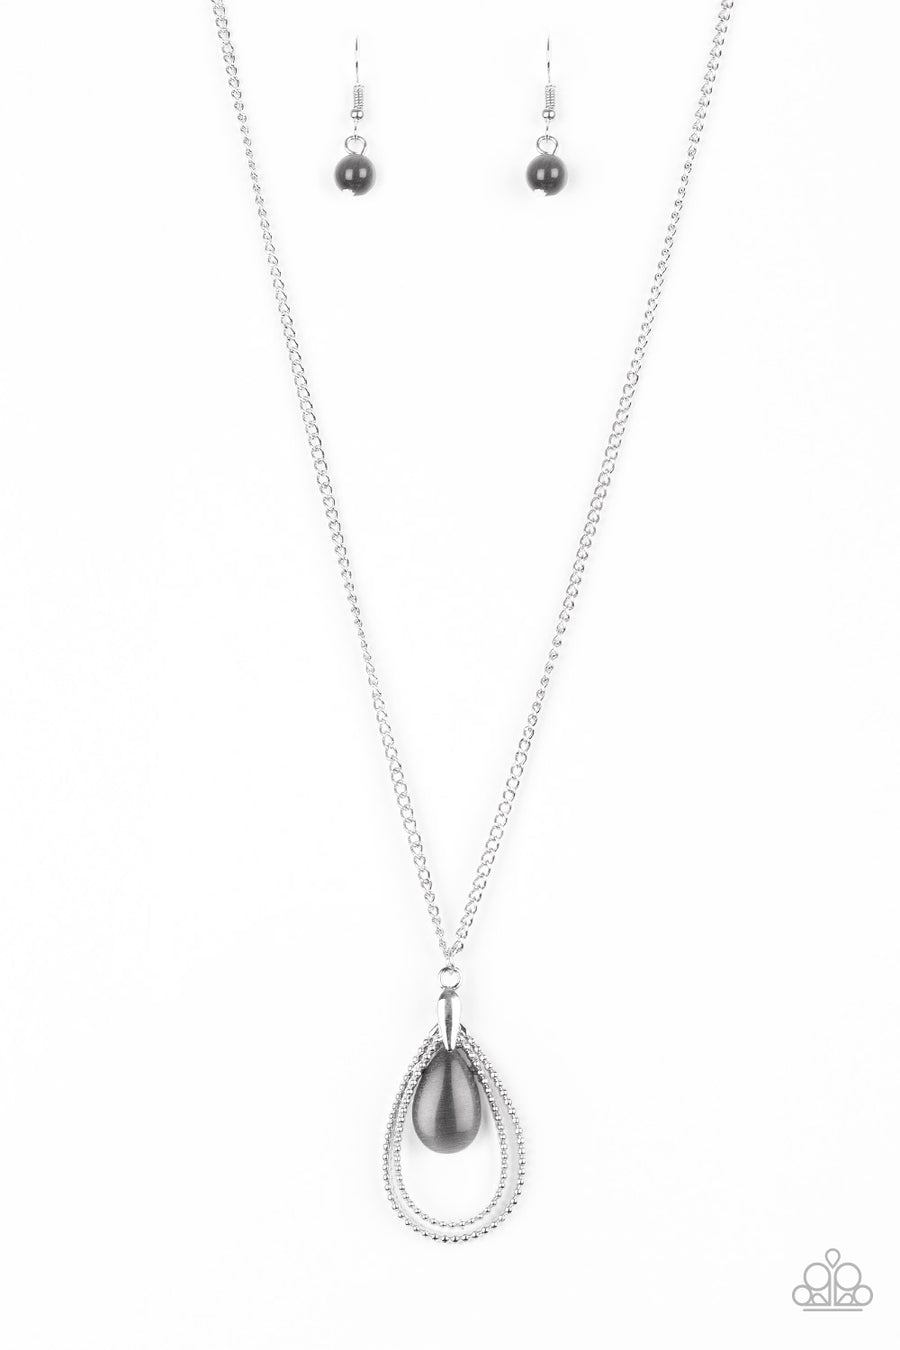 Teardrop Tranquility - Black and Silver Necklace - Paparazzi Accessories - Studded silver teardrops swing from the bottom of a shimmery silver chain. A glowing black moonstone attaches to the innermost frame, creating a whimsical pendant.